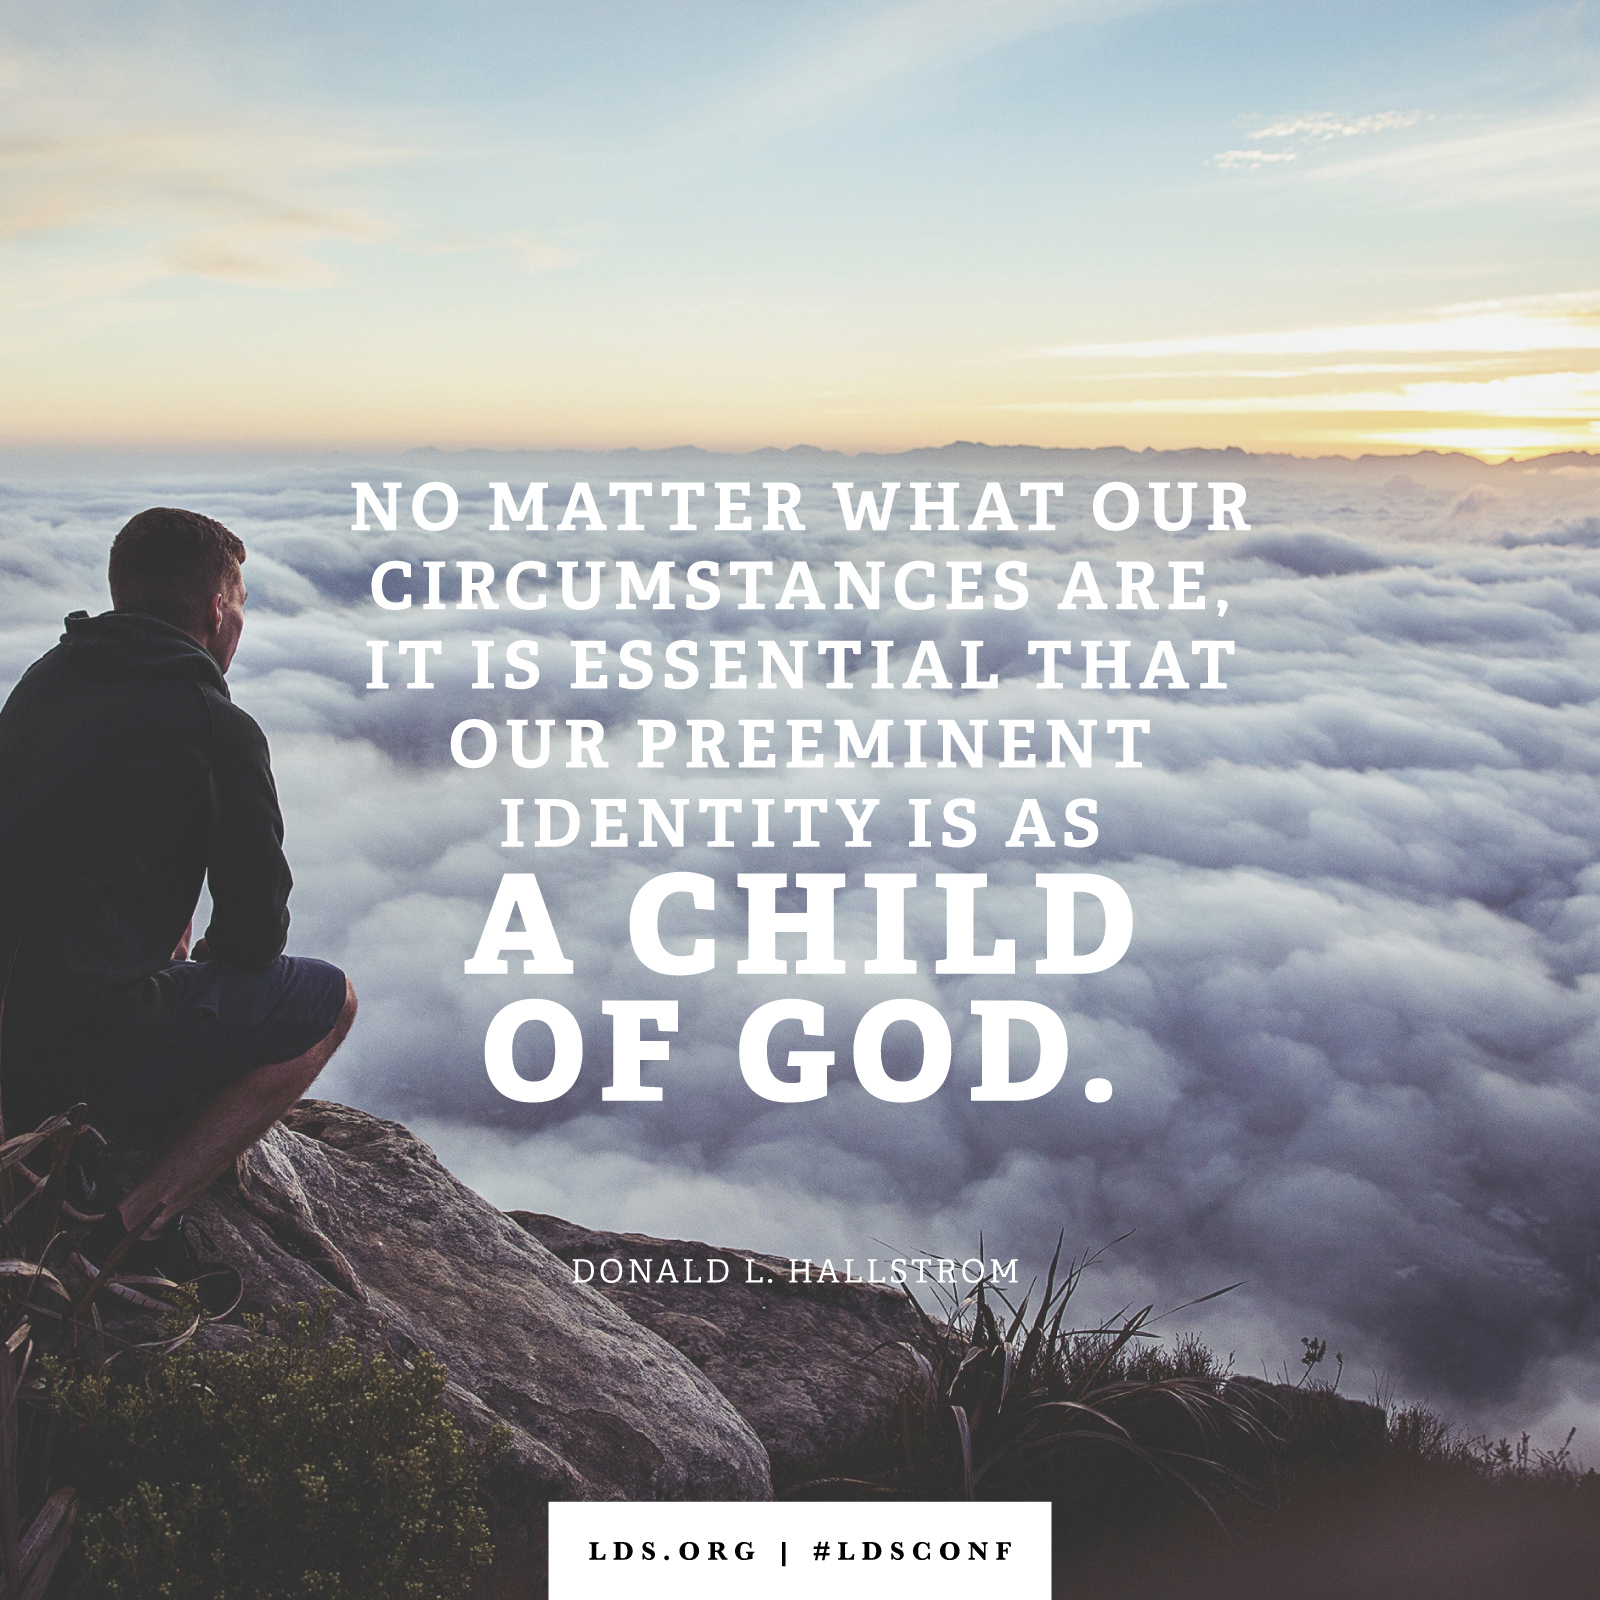 “No matter what our circumstances are, it is essential that our preeminent identity is as a child of God.” —Elder Donald L. Hallstrom, “I Am a Child of God”